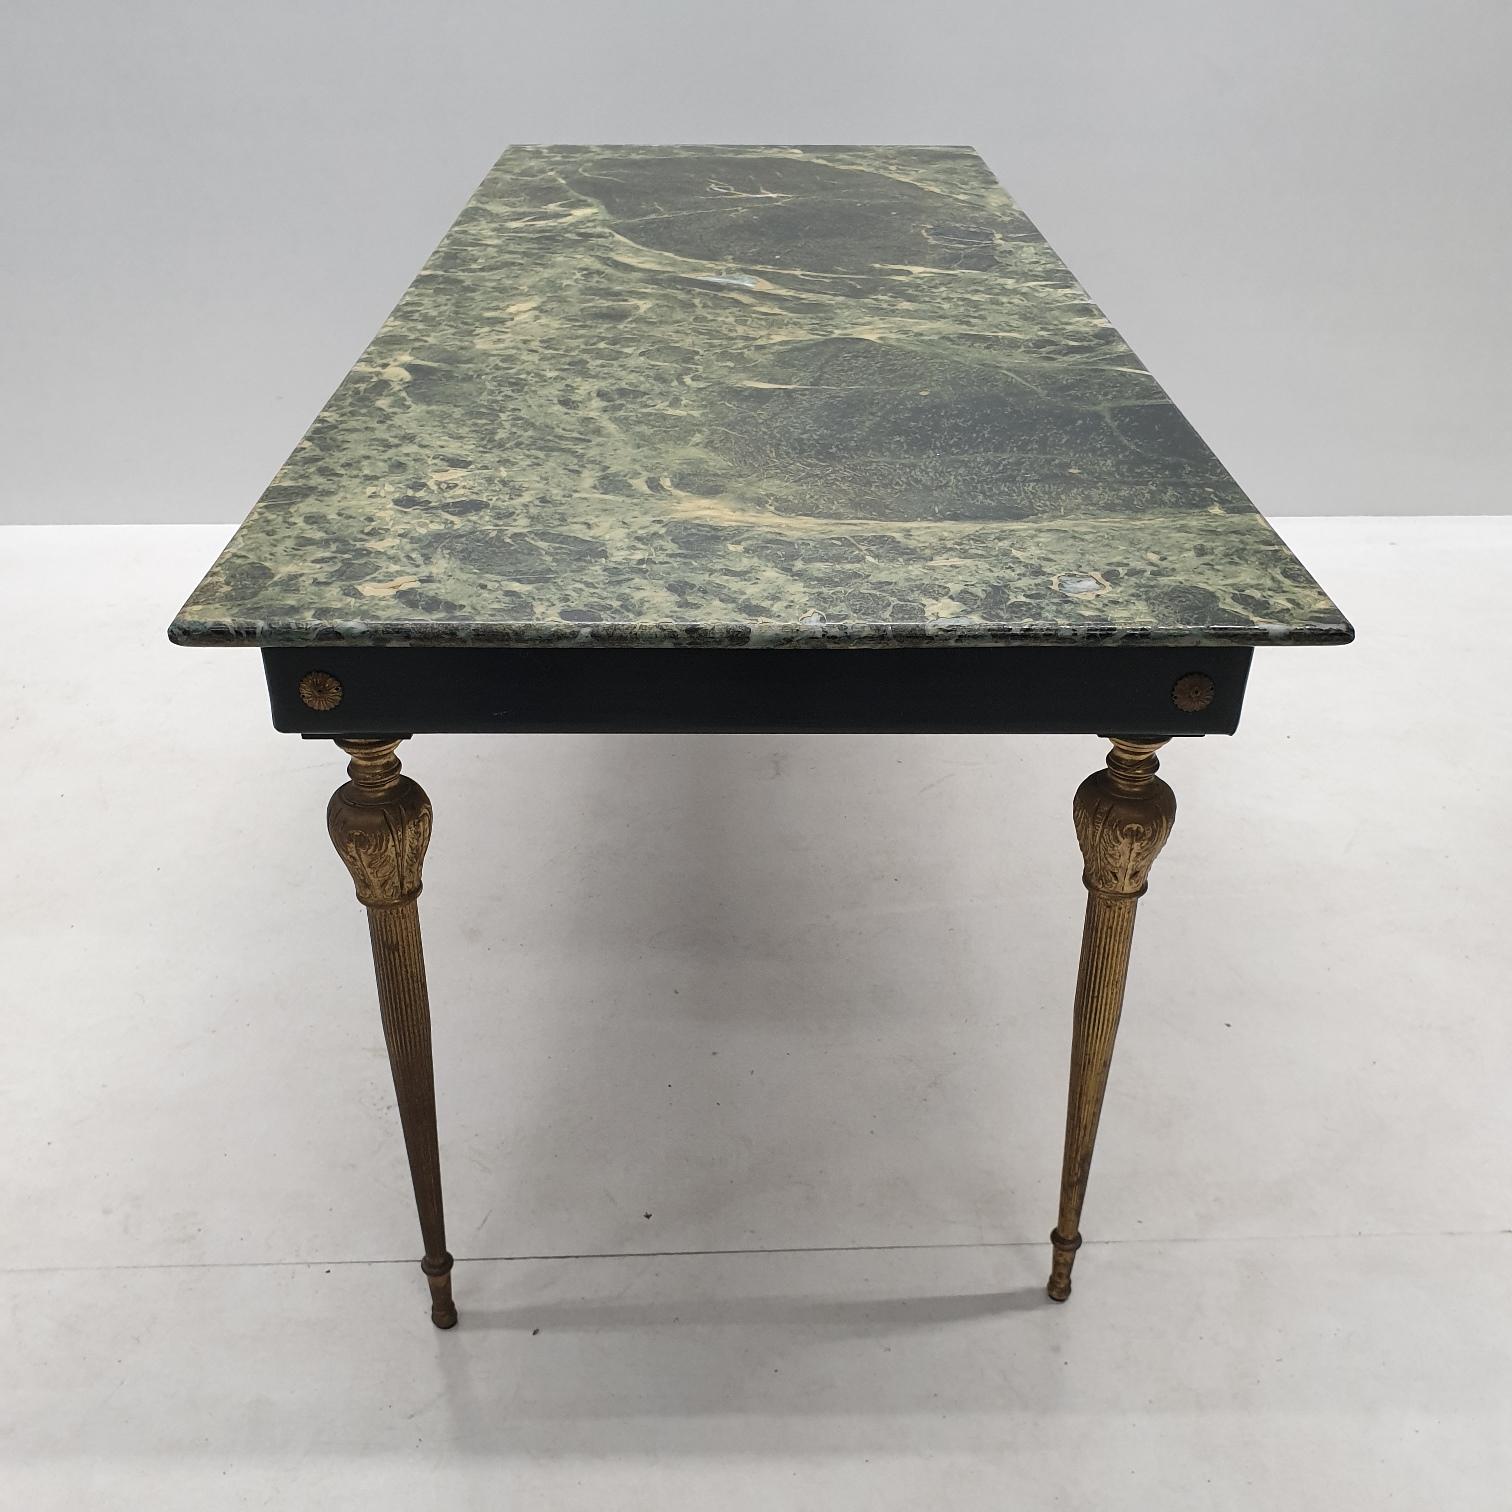 Vintage Brass Coffee Table with a Green Marble Top, 1950s For Sale 5